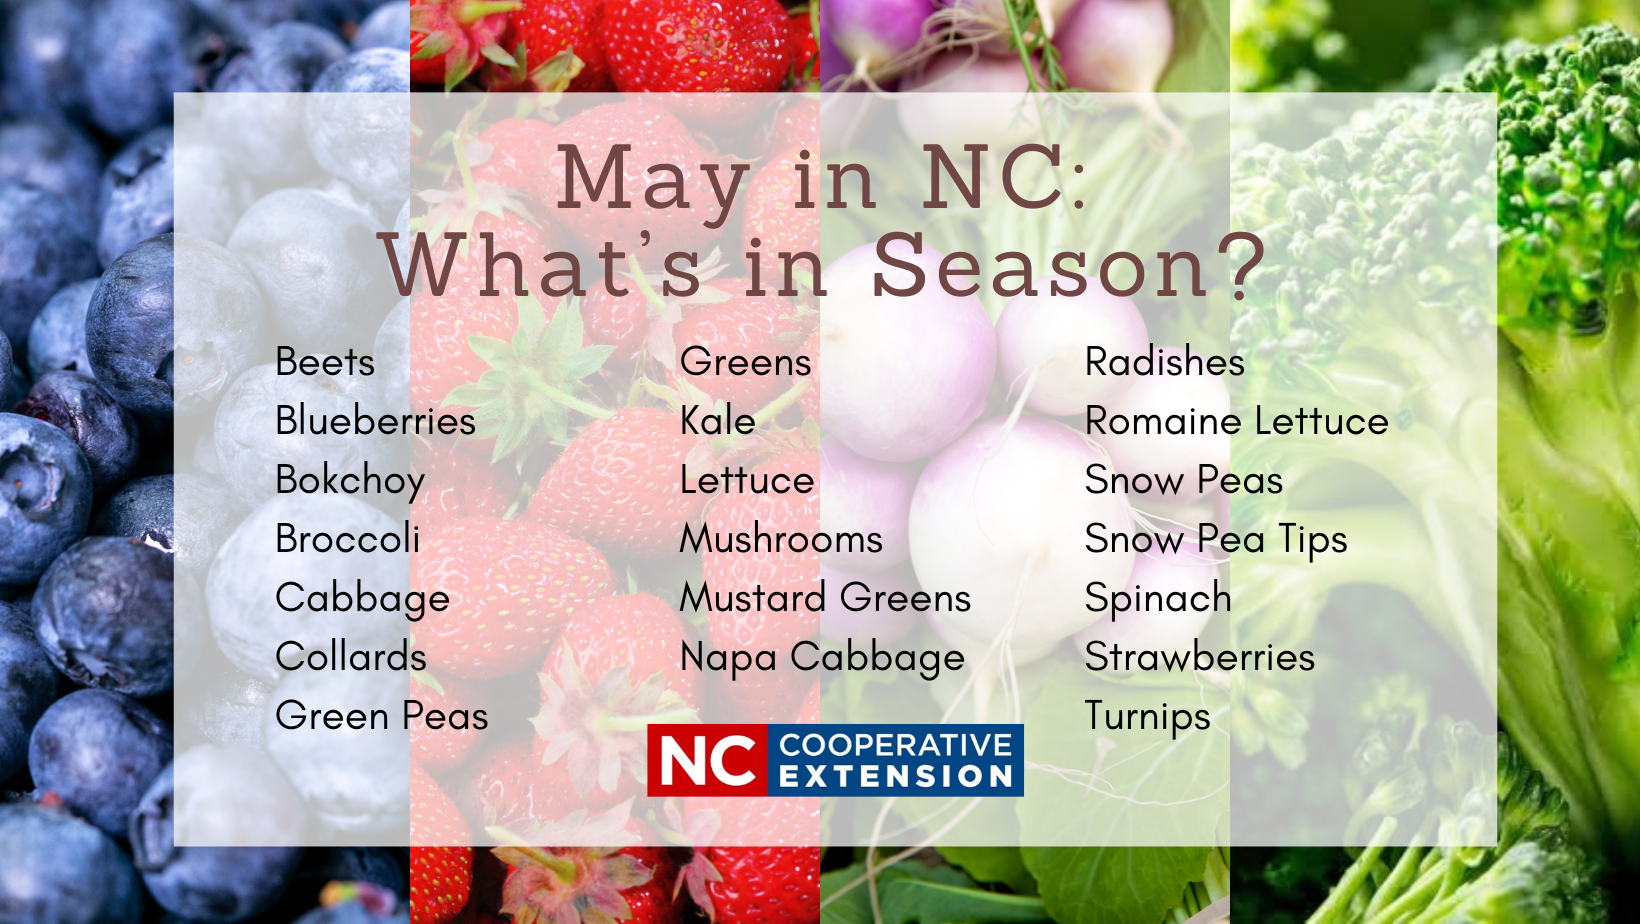 List of fruits and vegetables in season in NC in the month of May. Beets Greens Radishes Blueberries Kale Romaine Lettuce Bokchoy Lettuce Snow Peas Broccoli Mushrooms Snow Pea Tips Cabbage Mustard Greens Spinach Collards Napa Cabbage Strawberries Green Peas Turnips